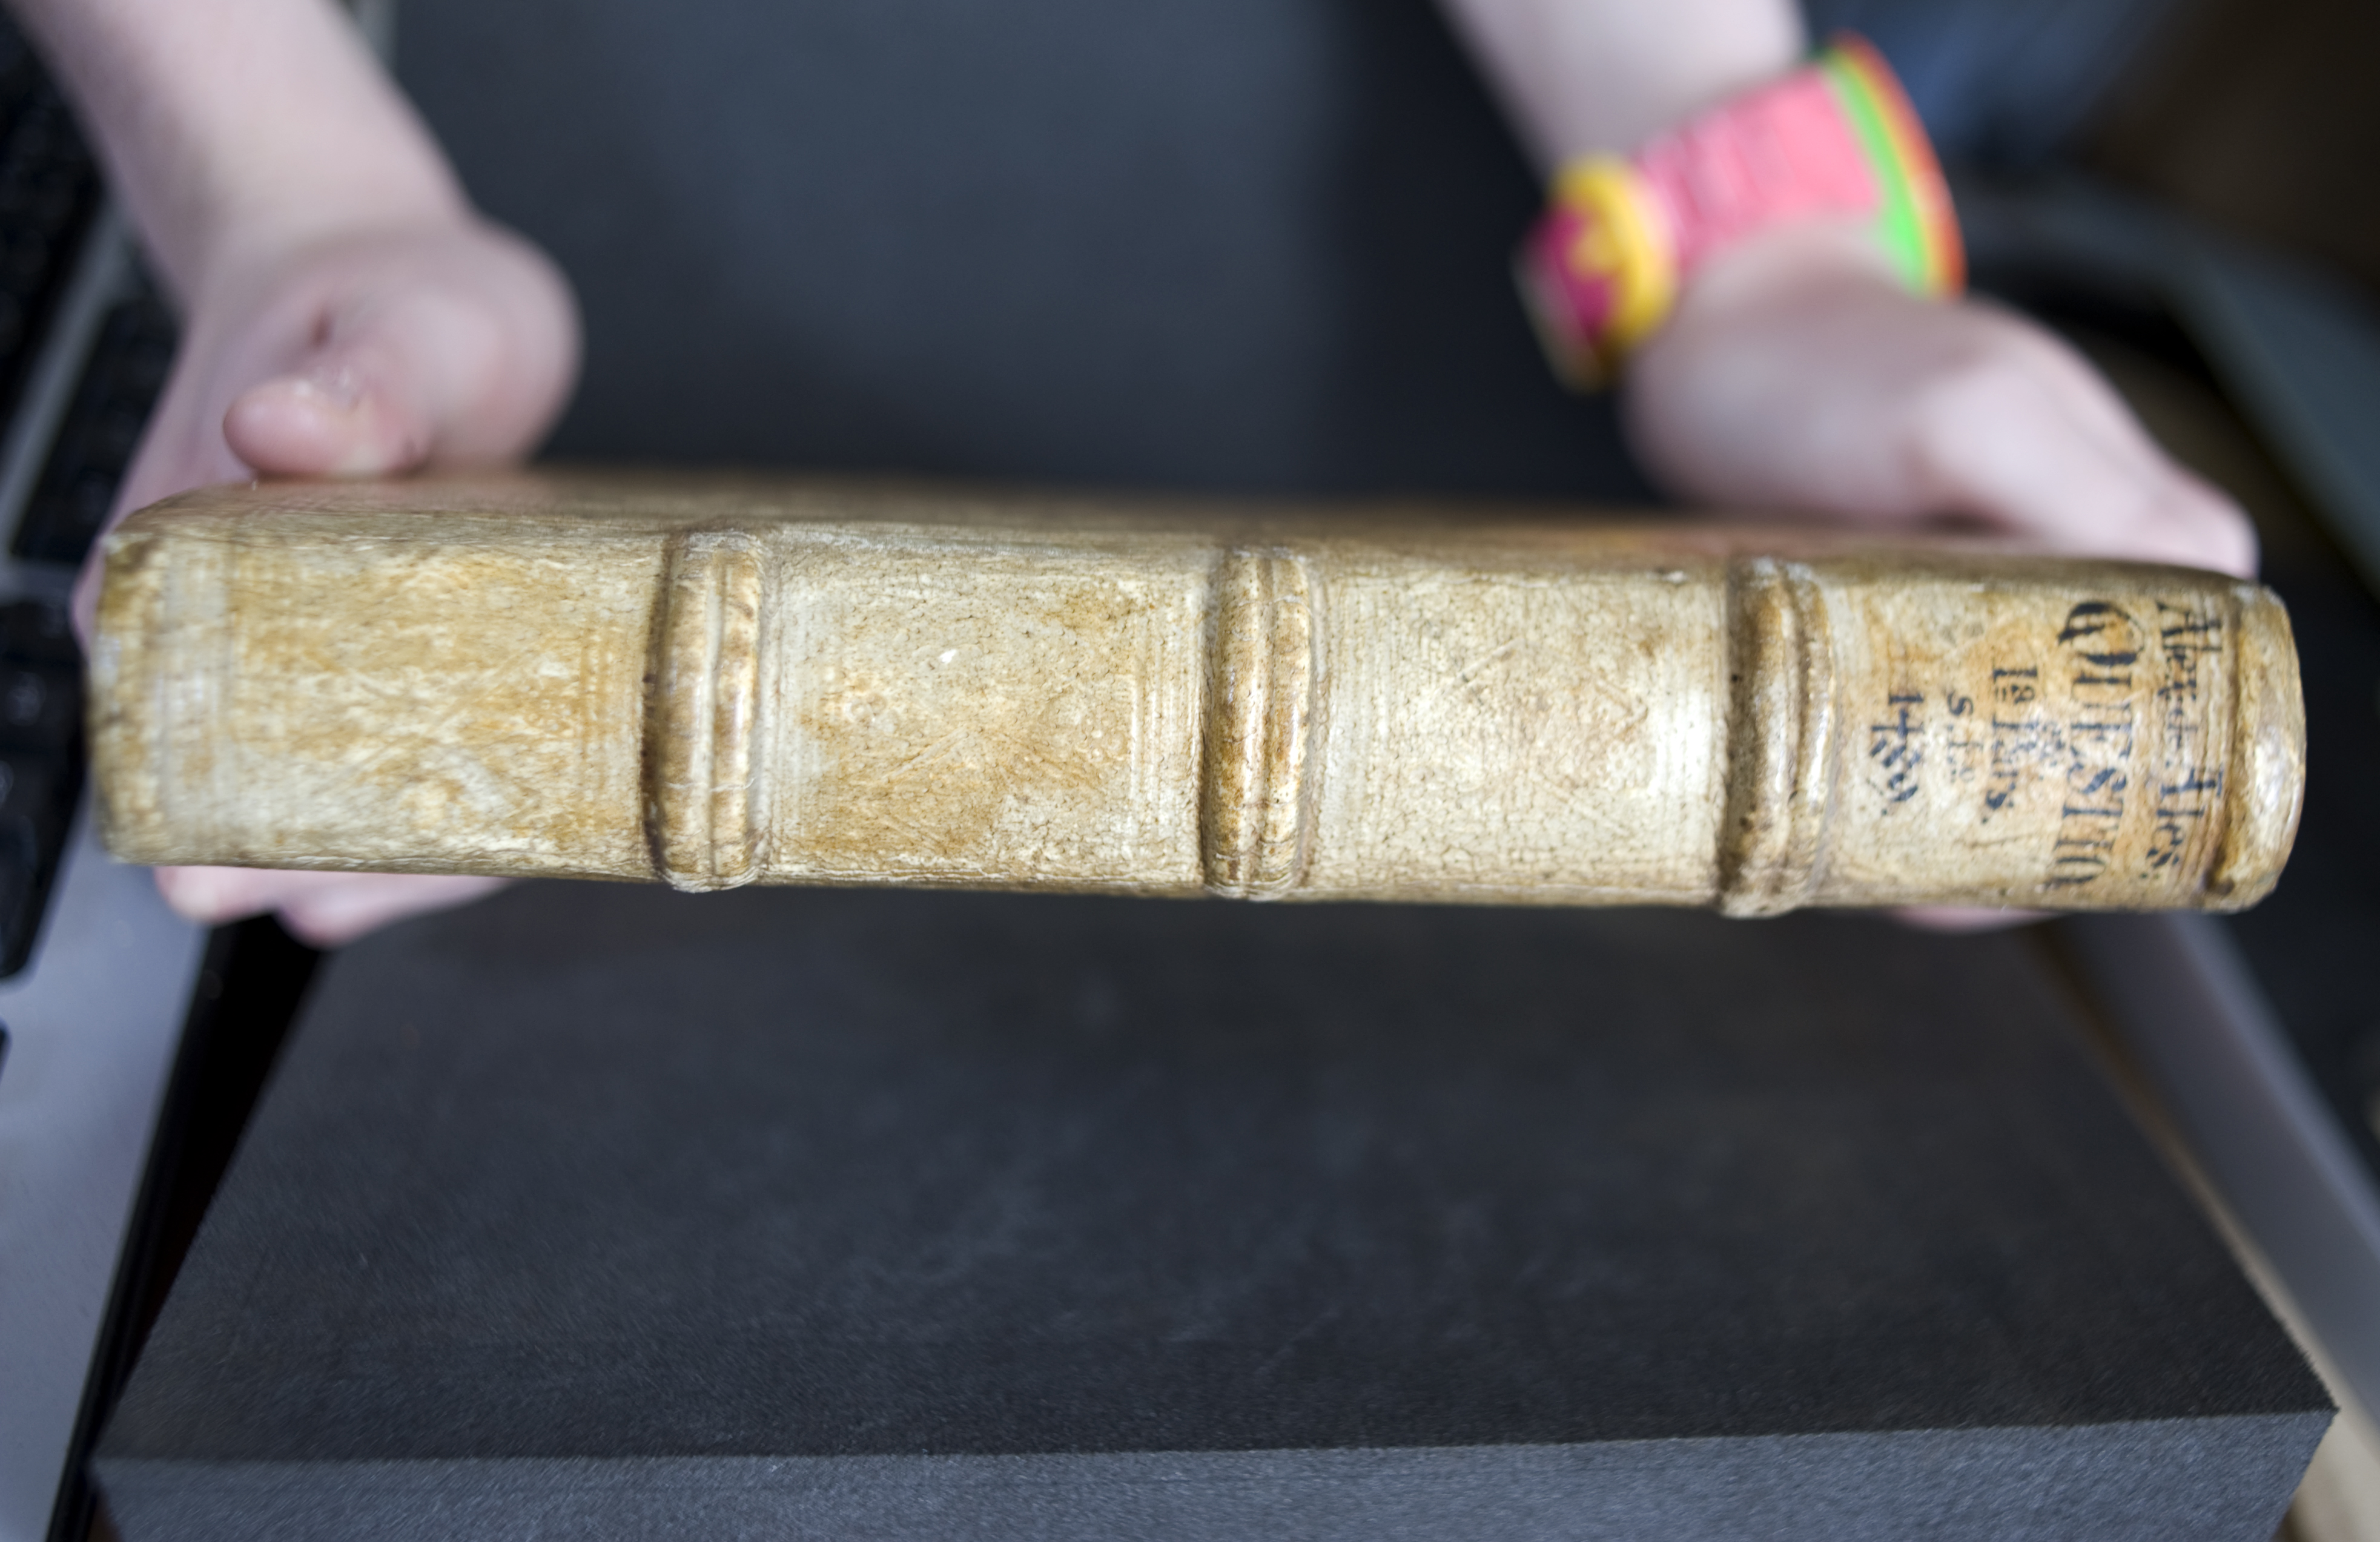 The spine of St Andrews' copy of vol. 1 of the 1489 printing of Alexander of Hales's Summa universae theologiae